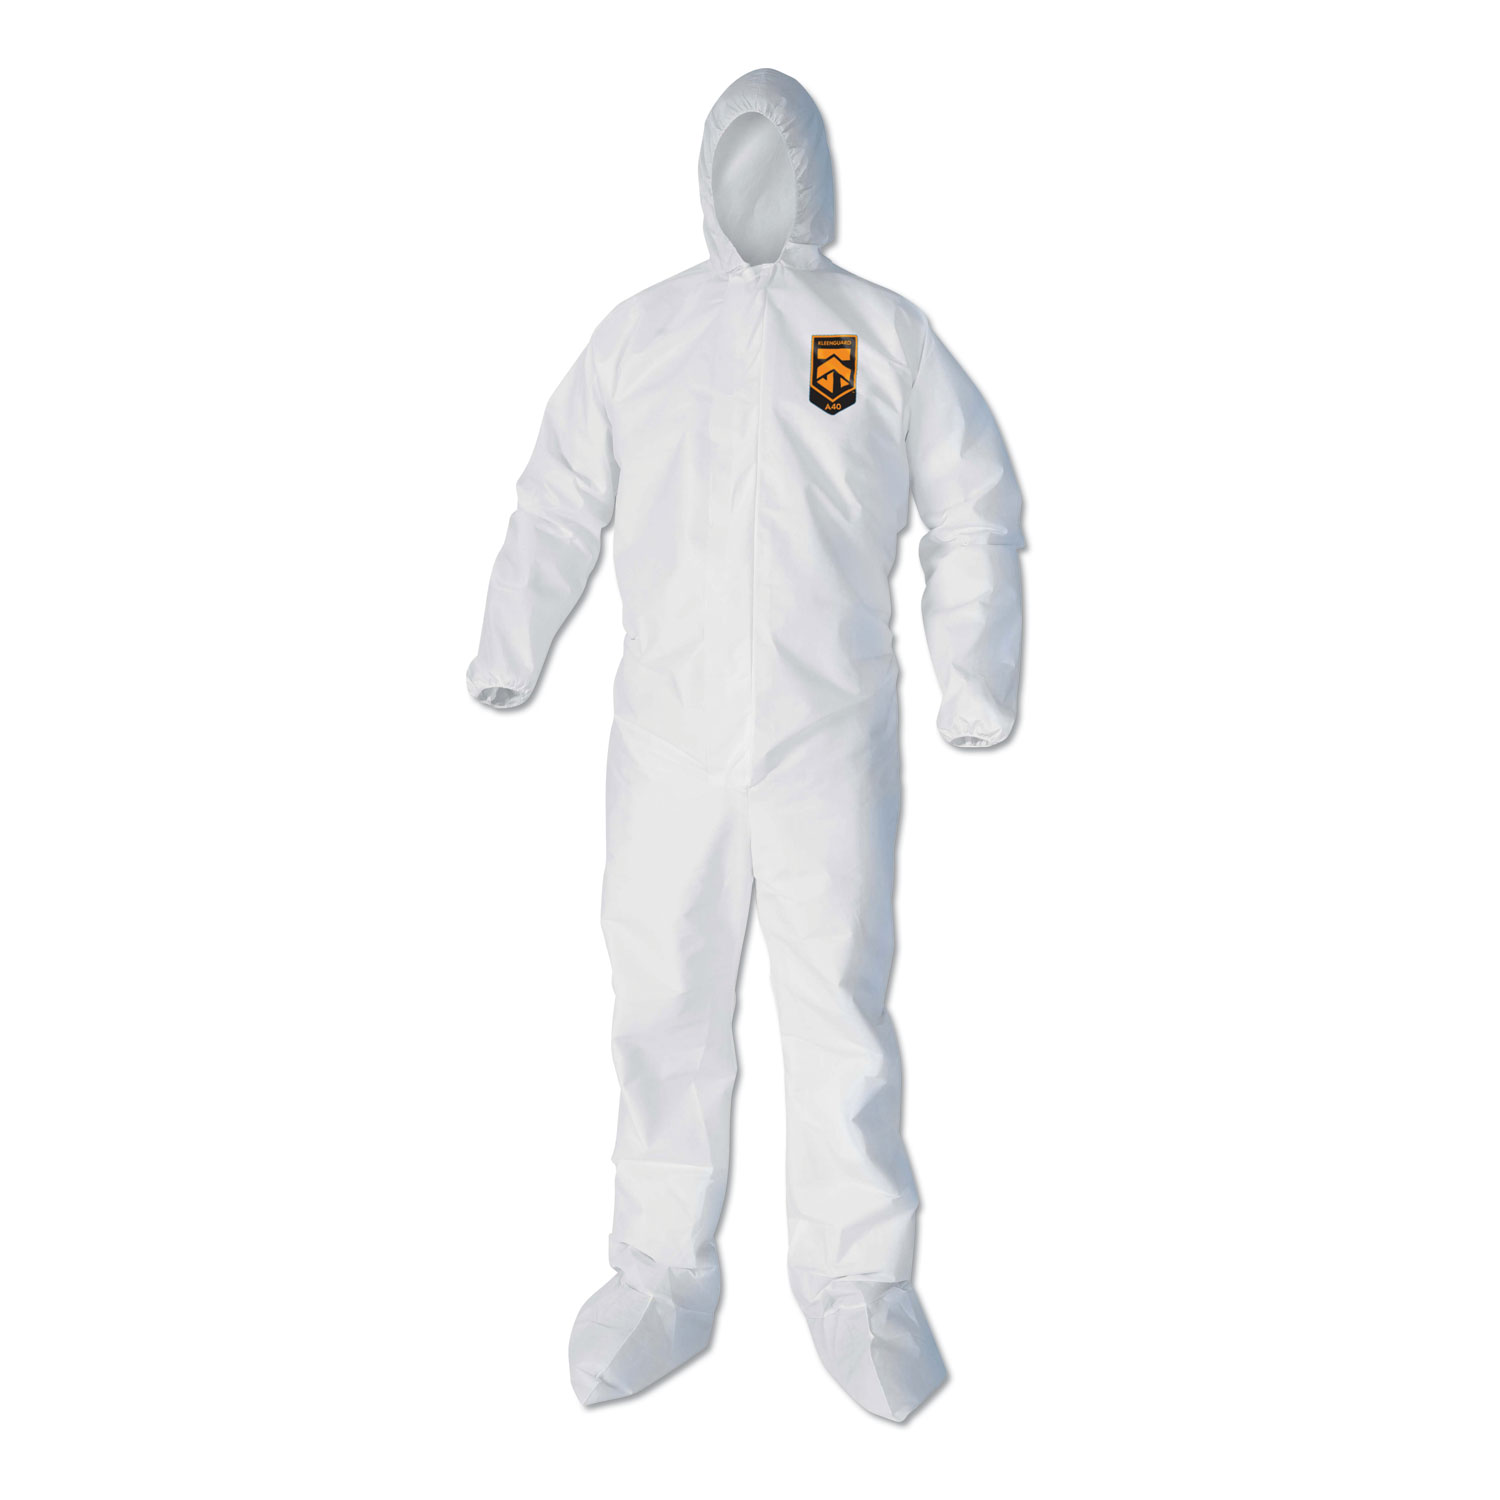  KleenGuard 44334 A40 Elastic-Cuff, Ankle, Hood and Boot Coveralls, X-Large, White, 25/Carton (KCC44334) 